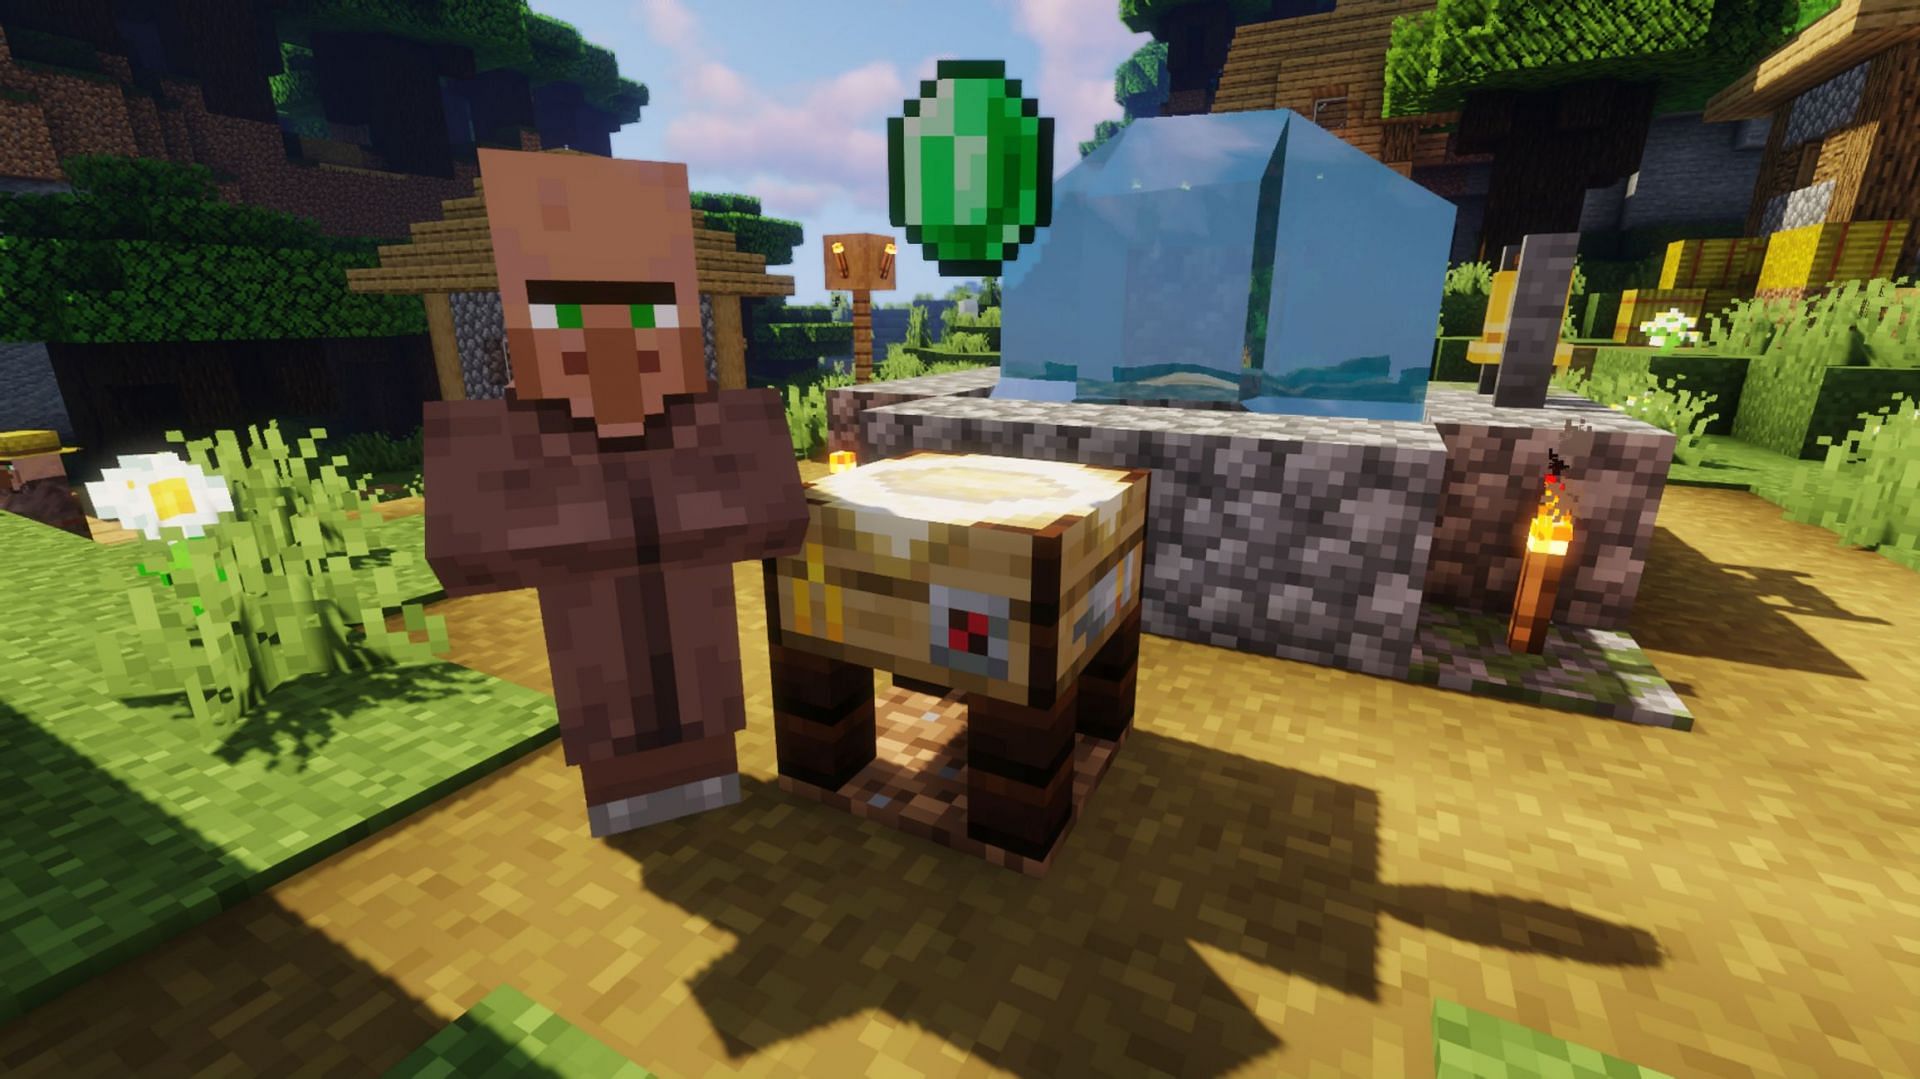 Trading posts consolidate villager trading with a single block (Image via Fuzs_/CurseForge)